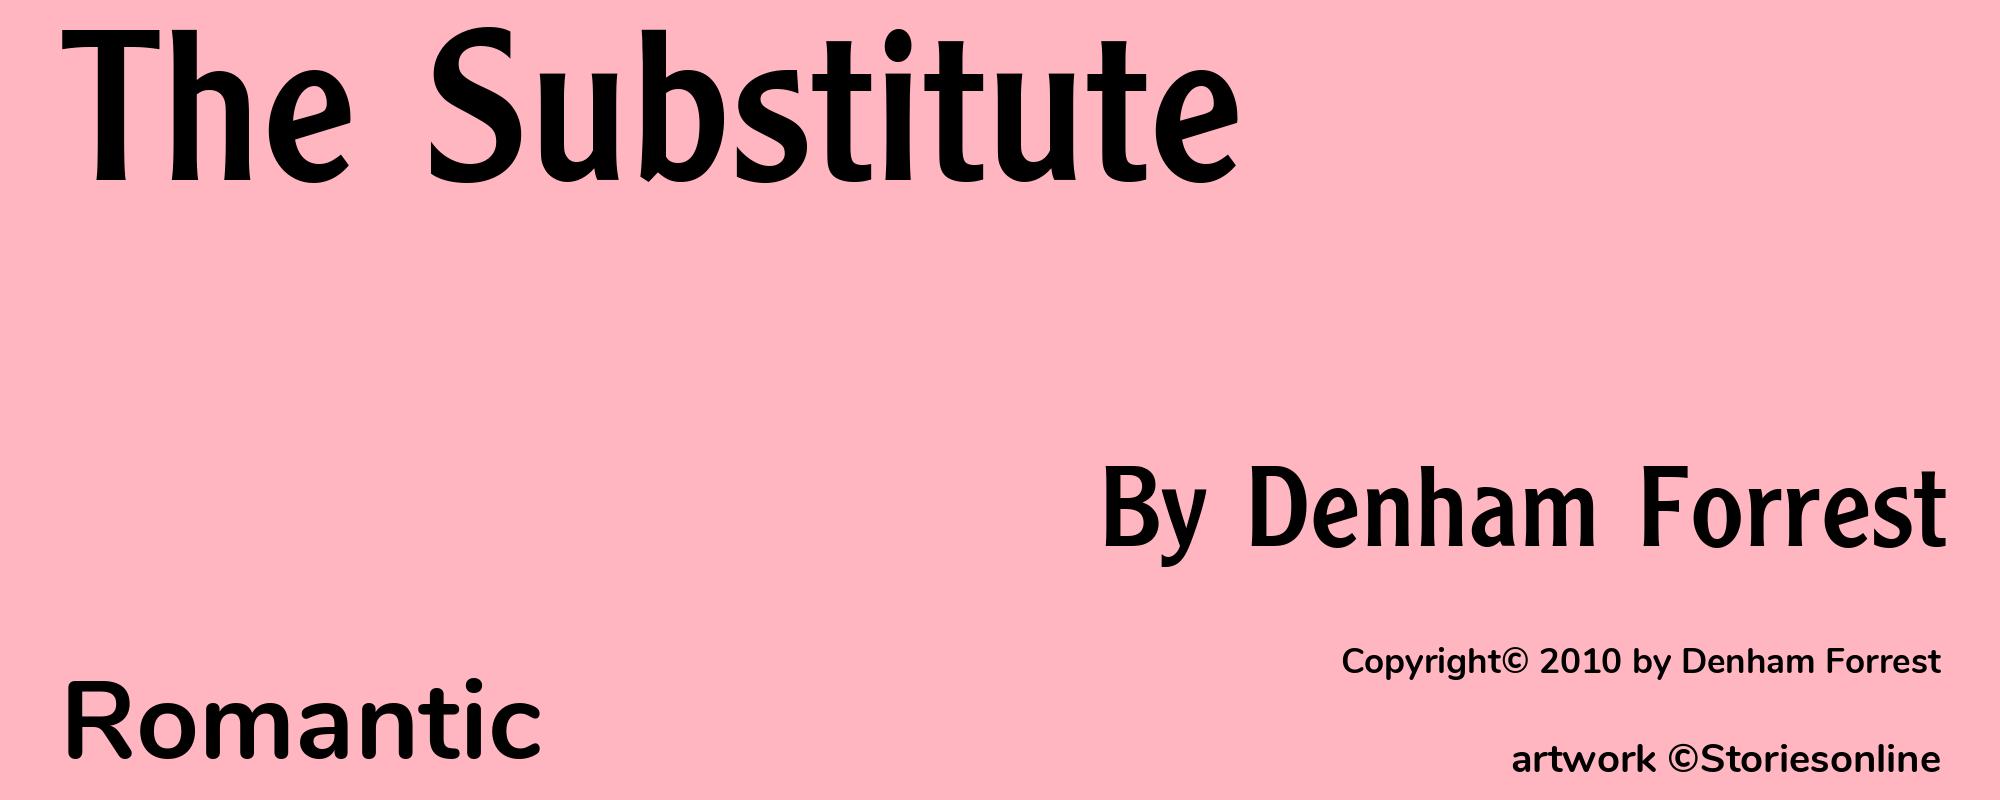 The Substitute - Cover